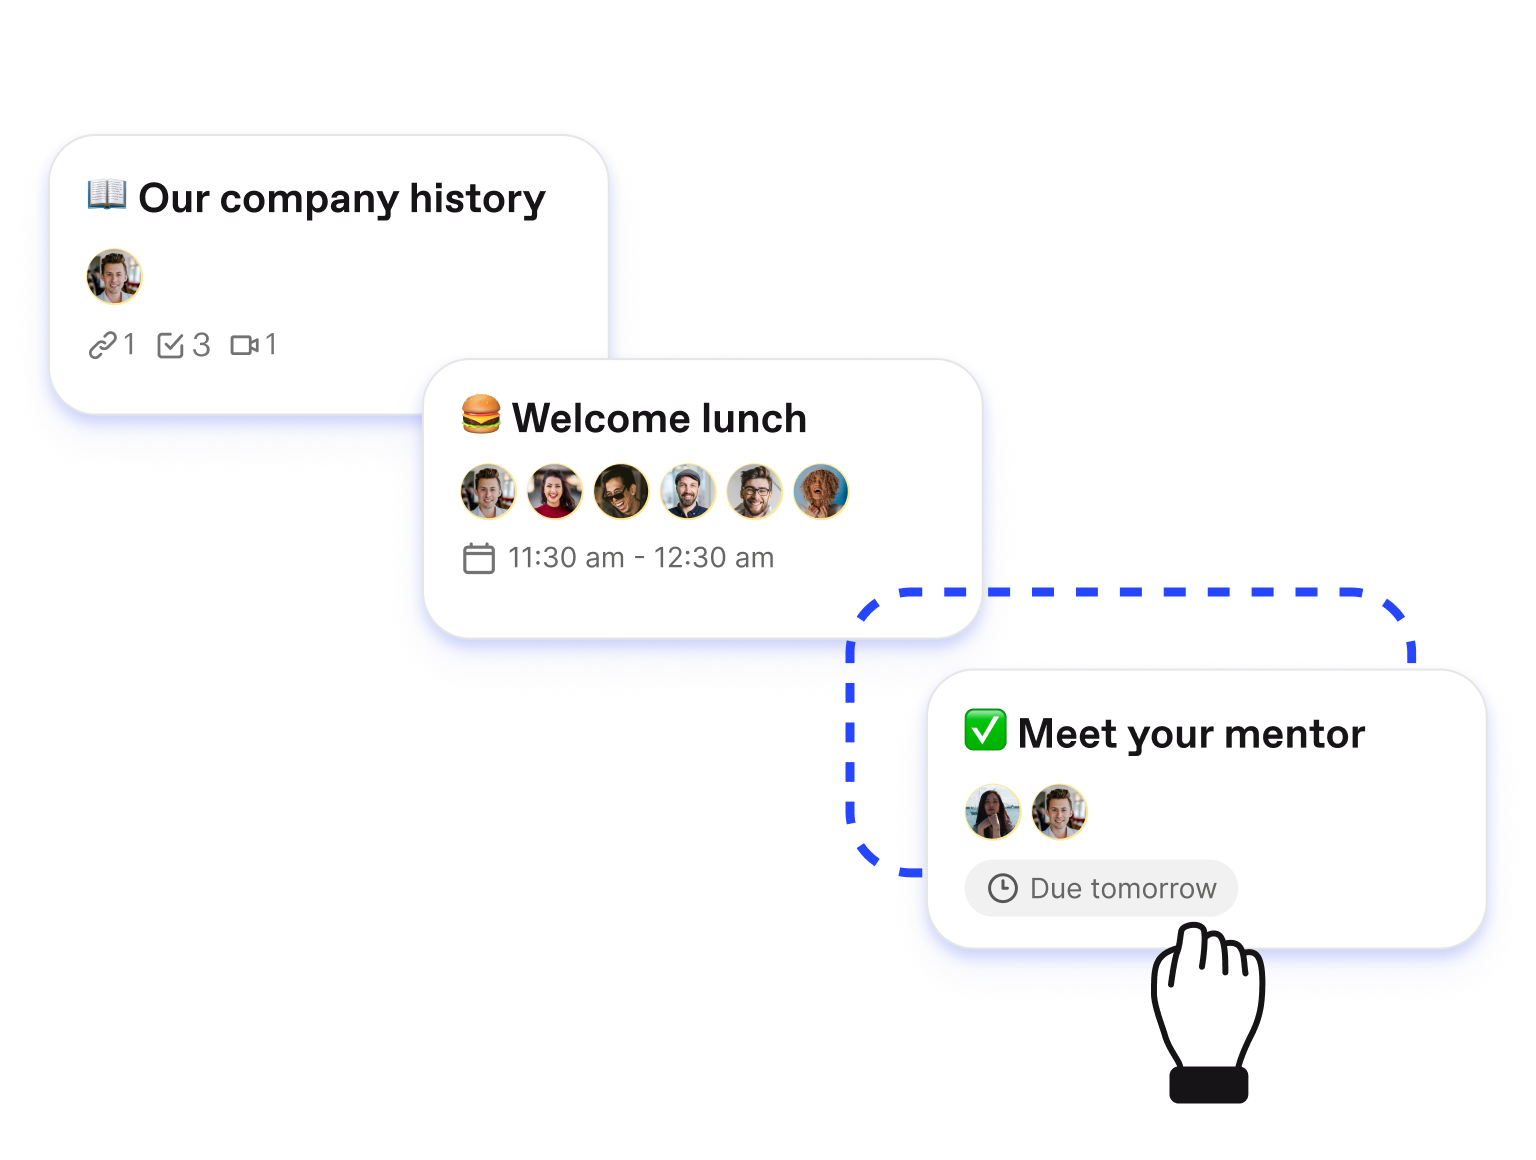 drag and drop onboarding activities on a timeline